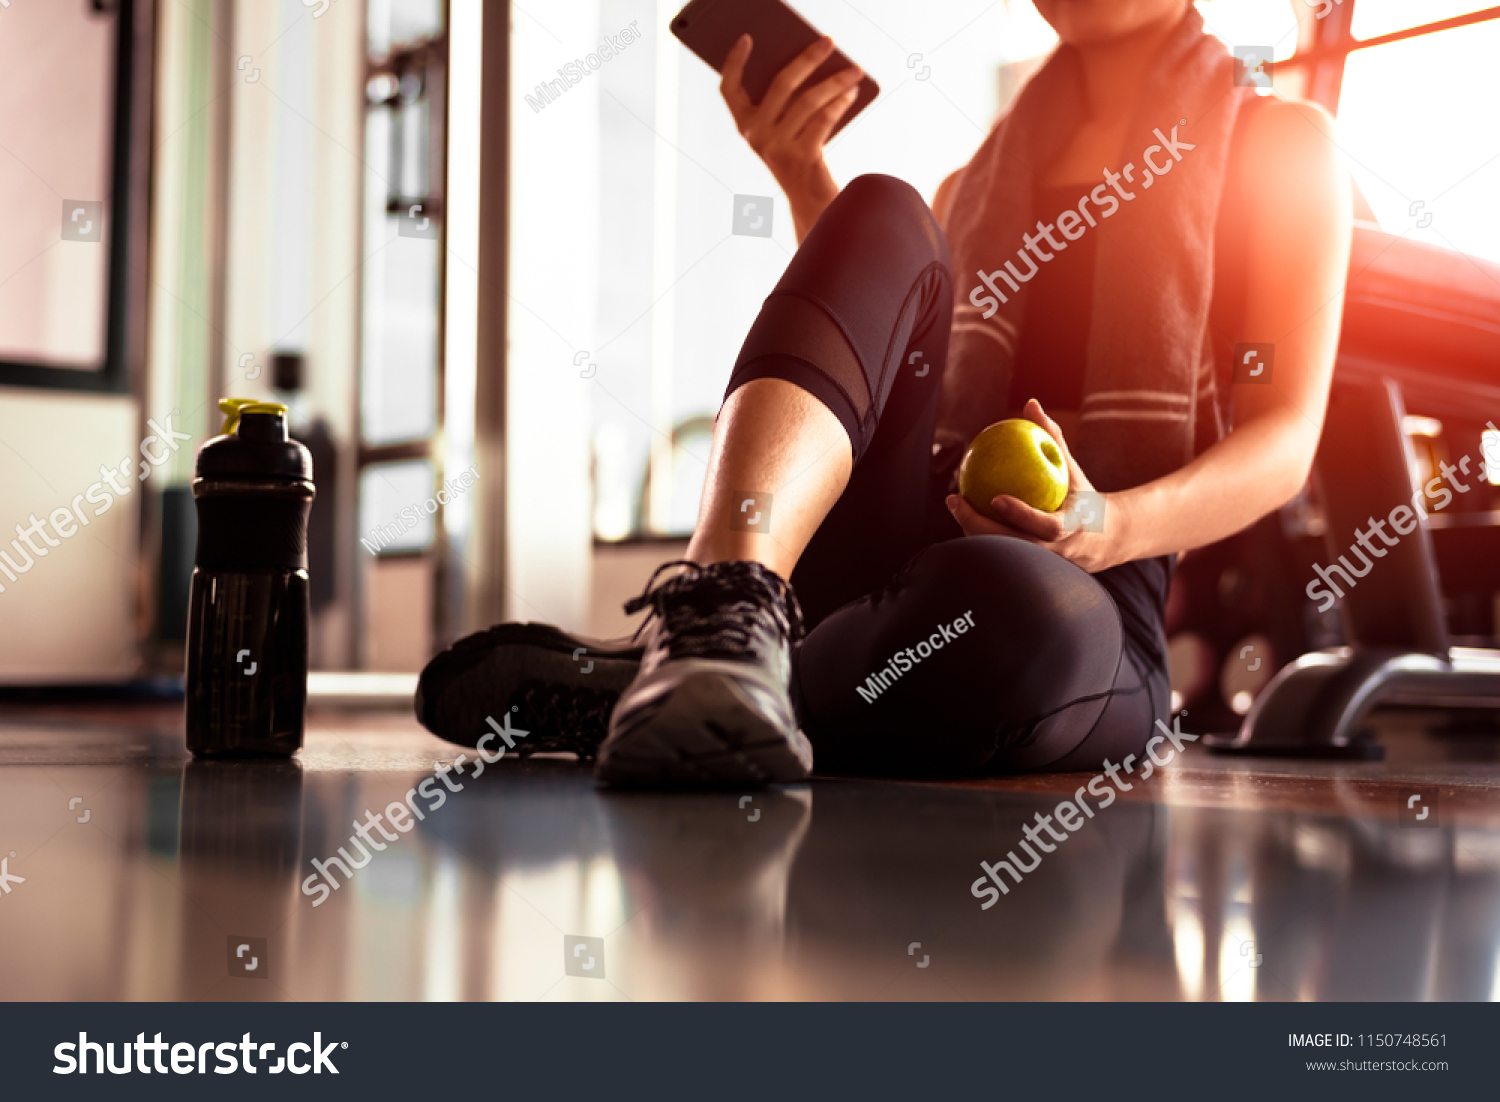 Close up of woman using smart phone and holding apple while workout in fitness gym. Sport and Technology concept. Lifestyles and Healthcare theme. #1150748561